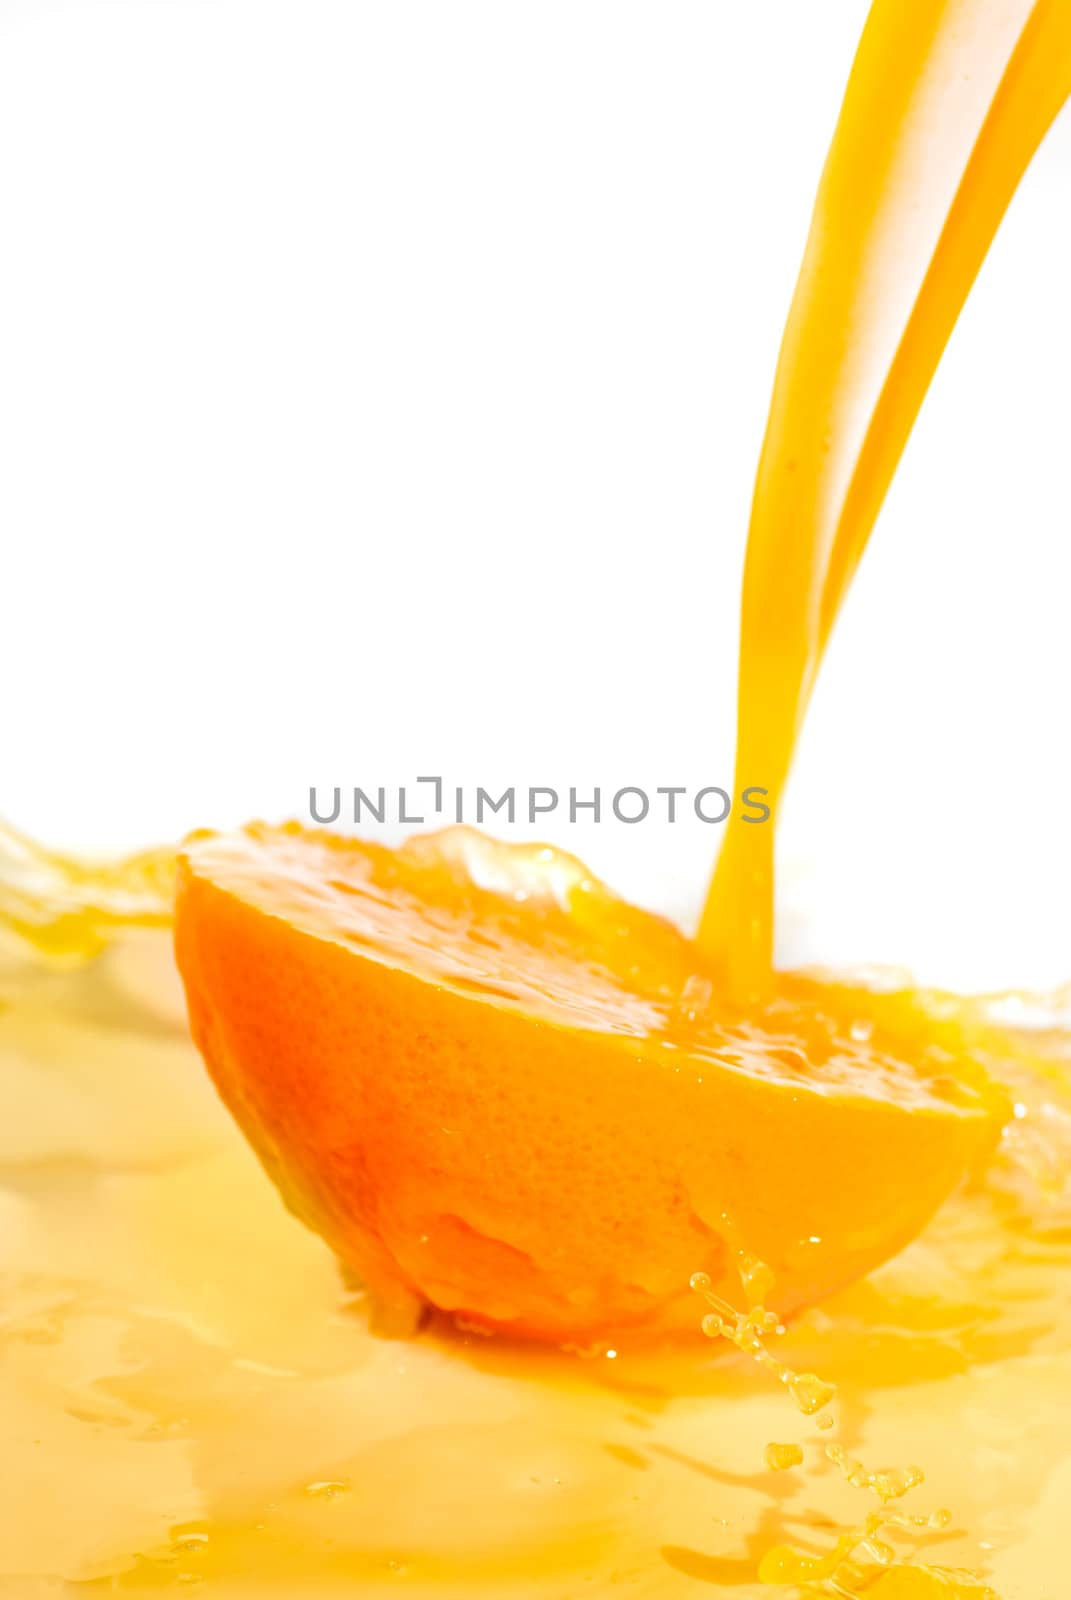 Orange slice with pouring juice, healthy concept